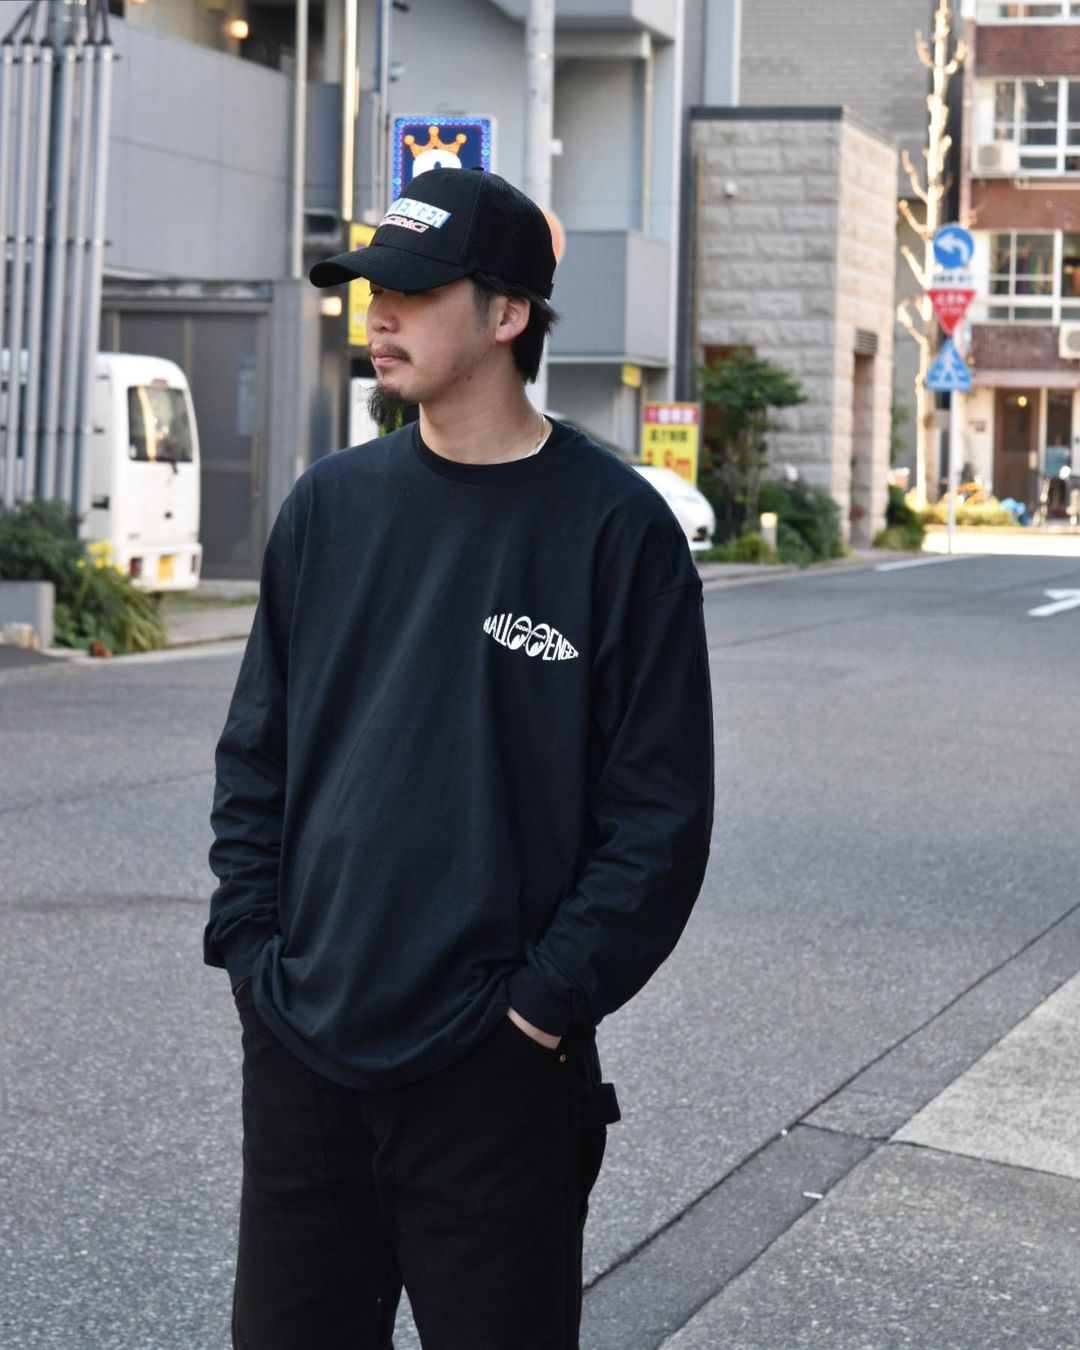 CHALLENGER / × MOON EQUIPPED L/S TEE